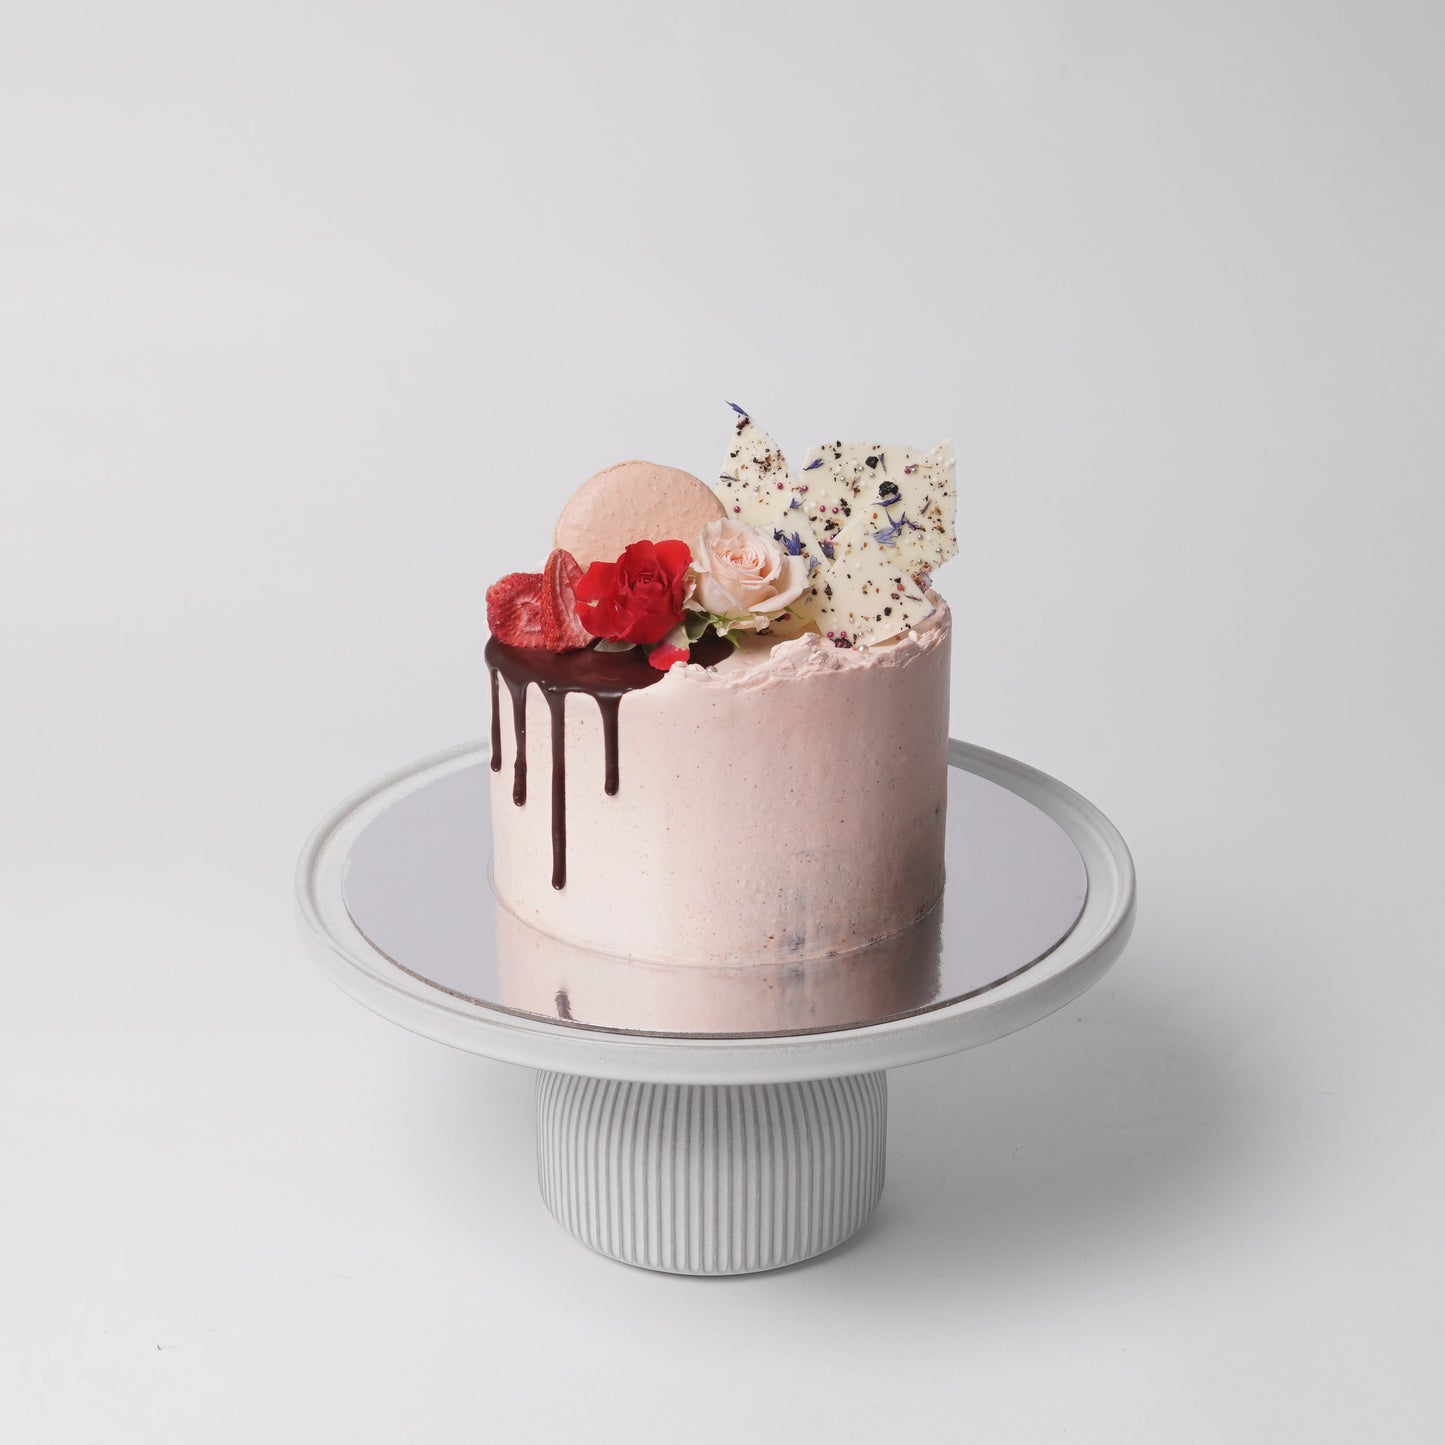 CHOCOLATE & STRAWBERRY CAKE FRONT IN 2 DAYS